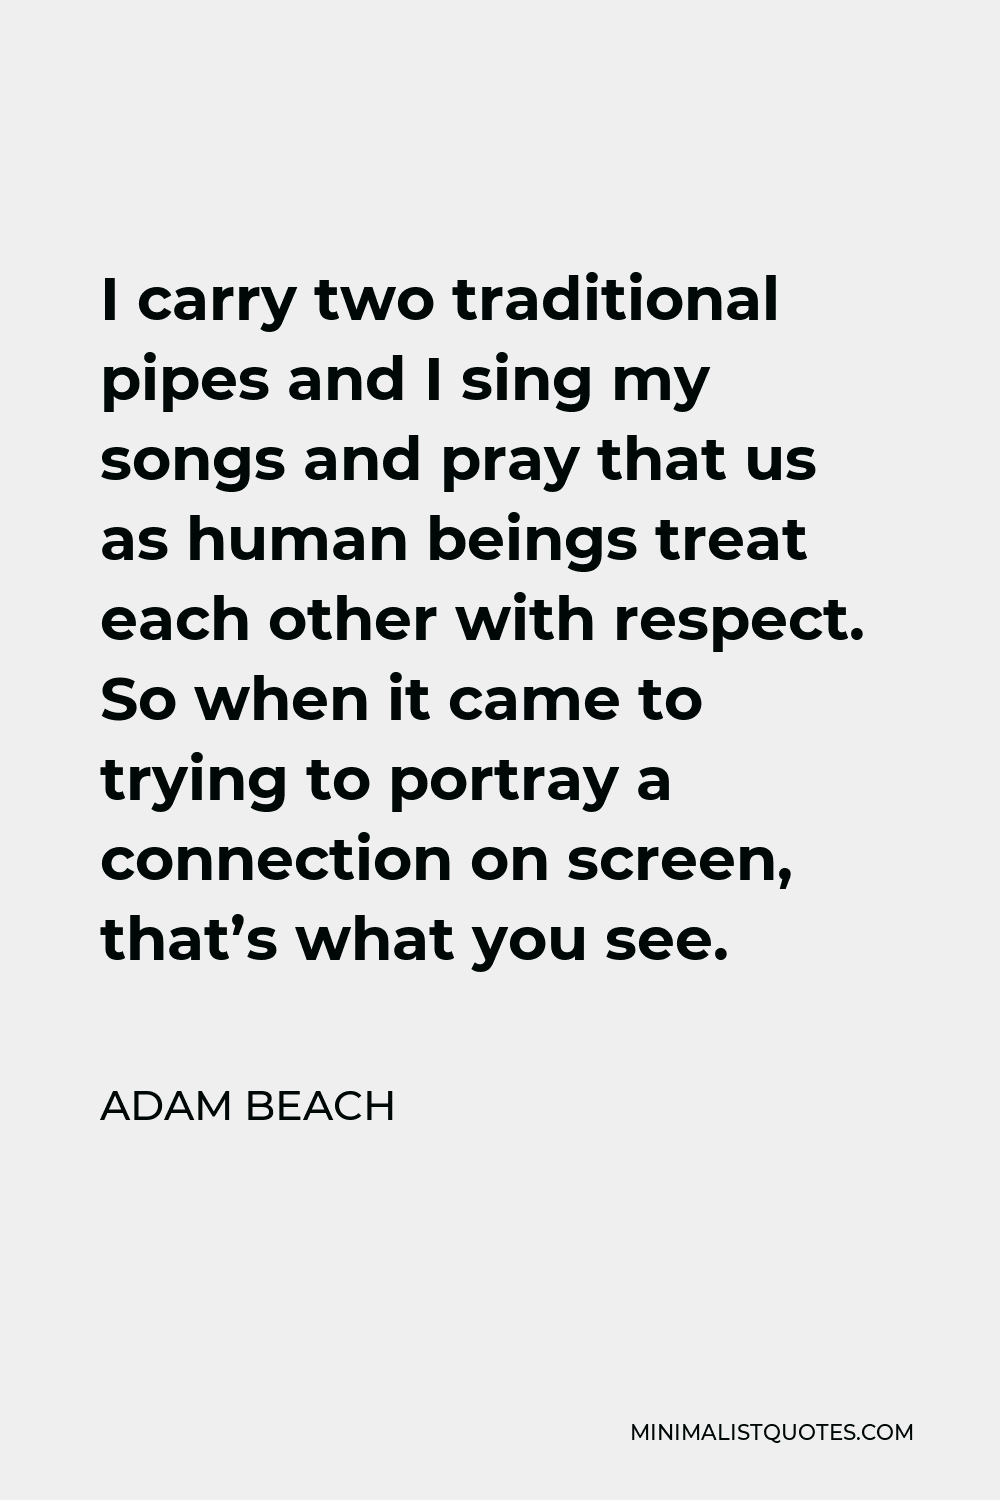 Adam Beach Quote - I carry two traditional pipes and I sing my songs and pray that us as human beings treat each other with respect. So when it came to trying to portray a connection on screen, that’s what you see.